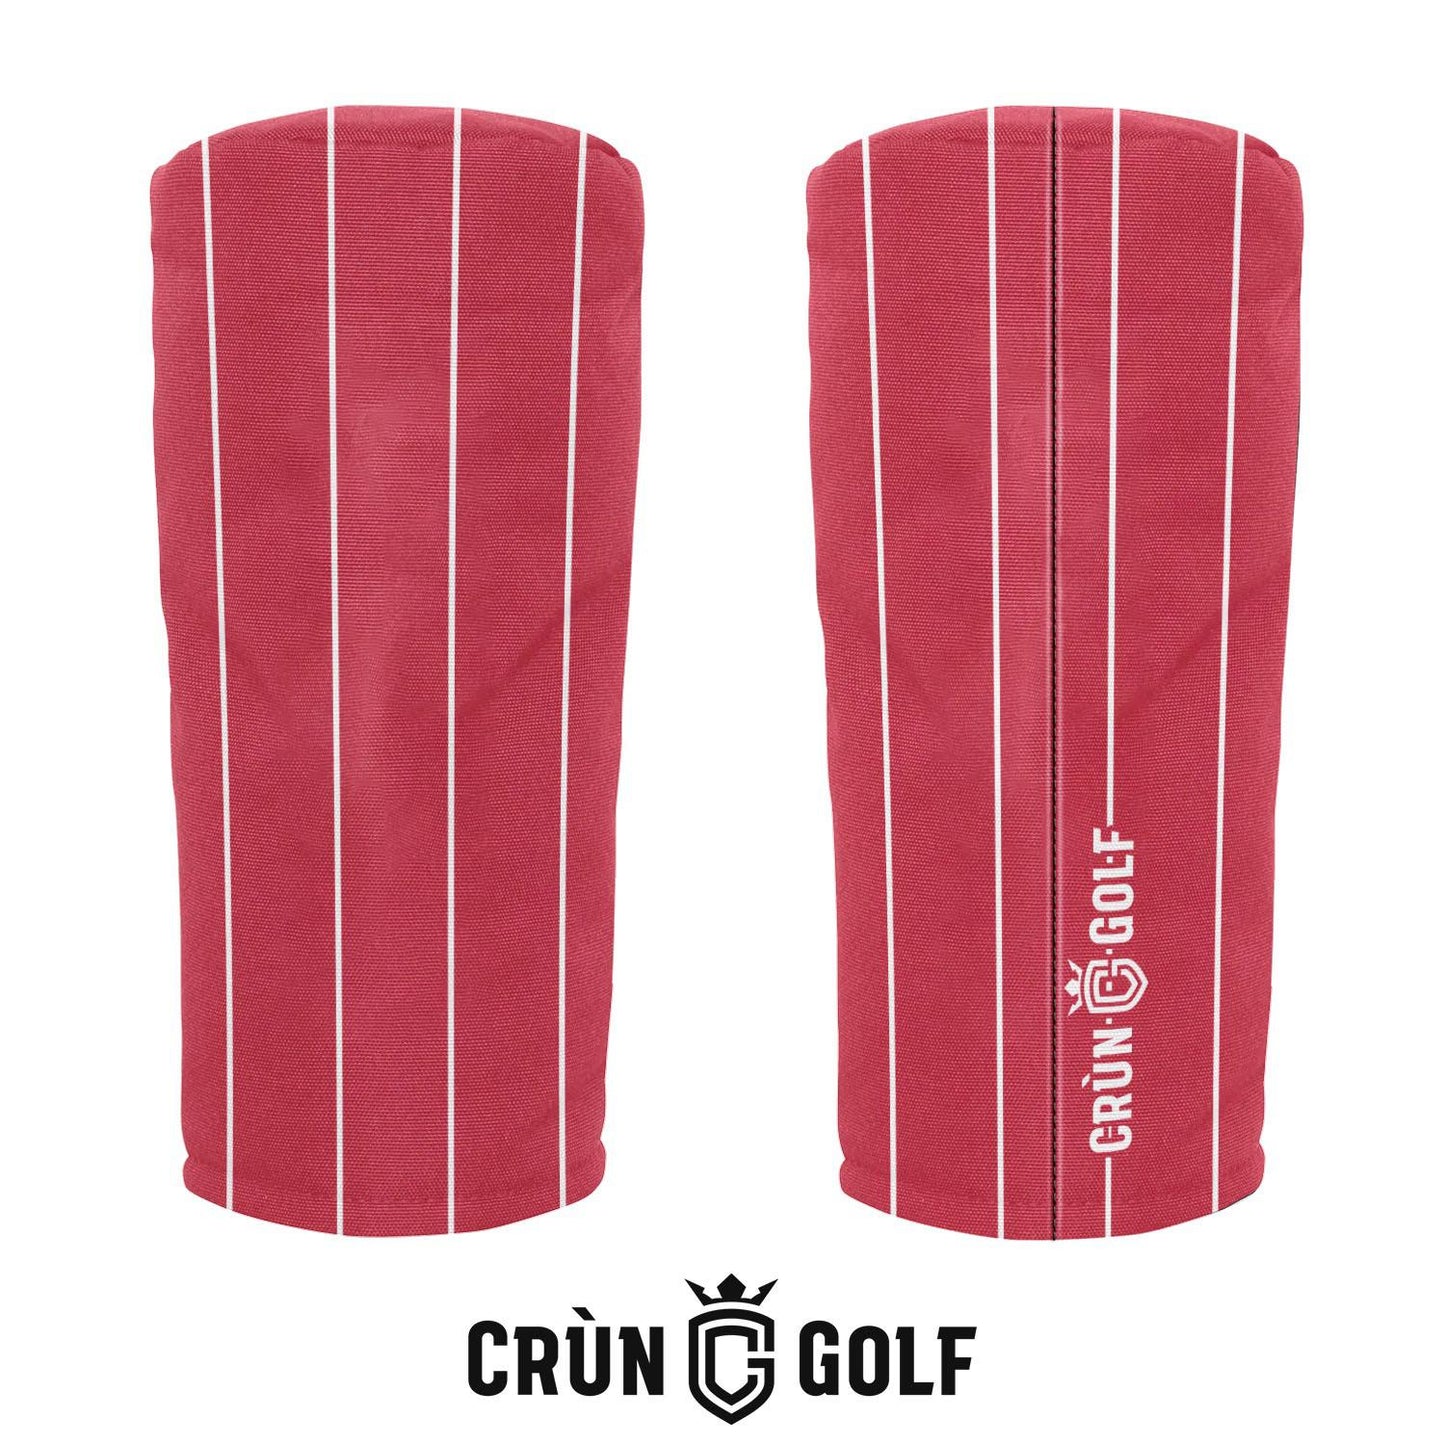 Imps Headcover - 2020 Home